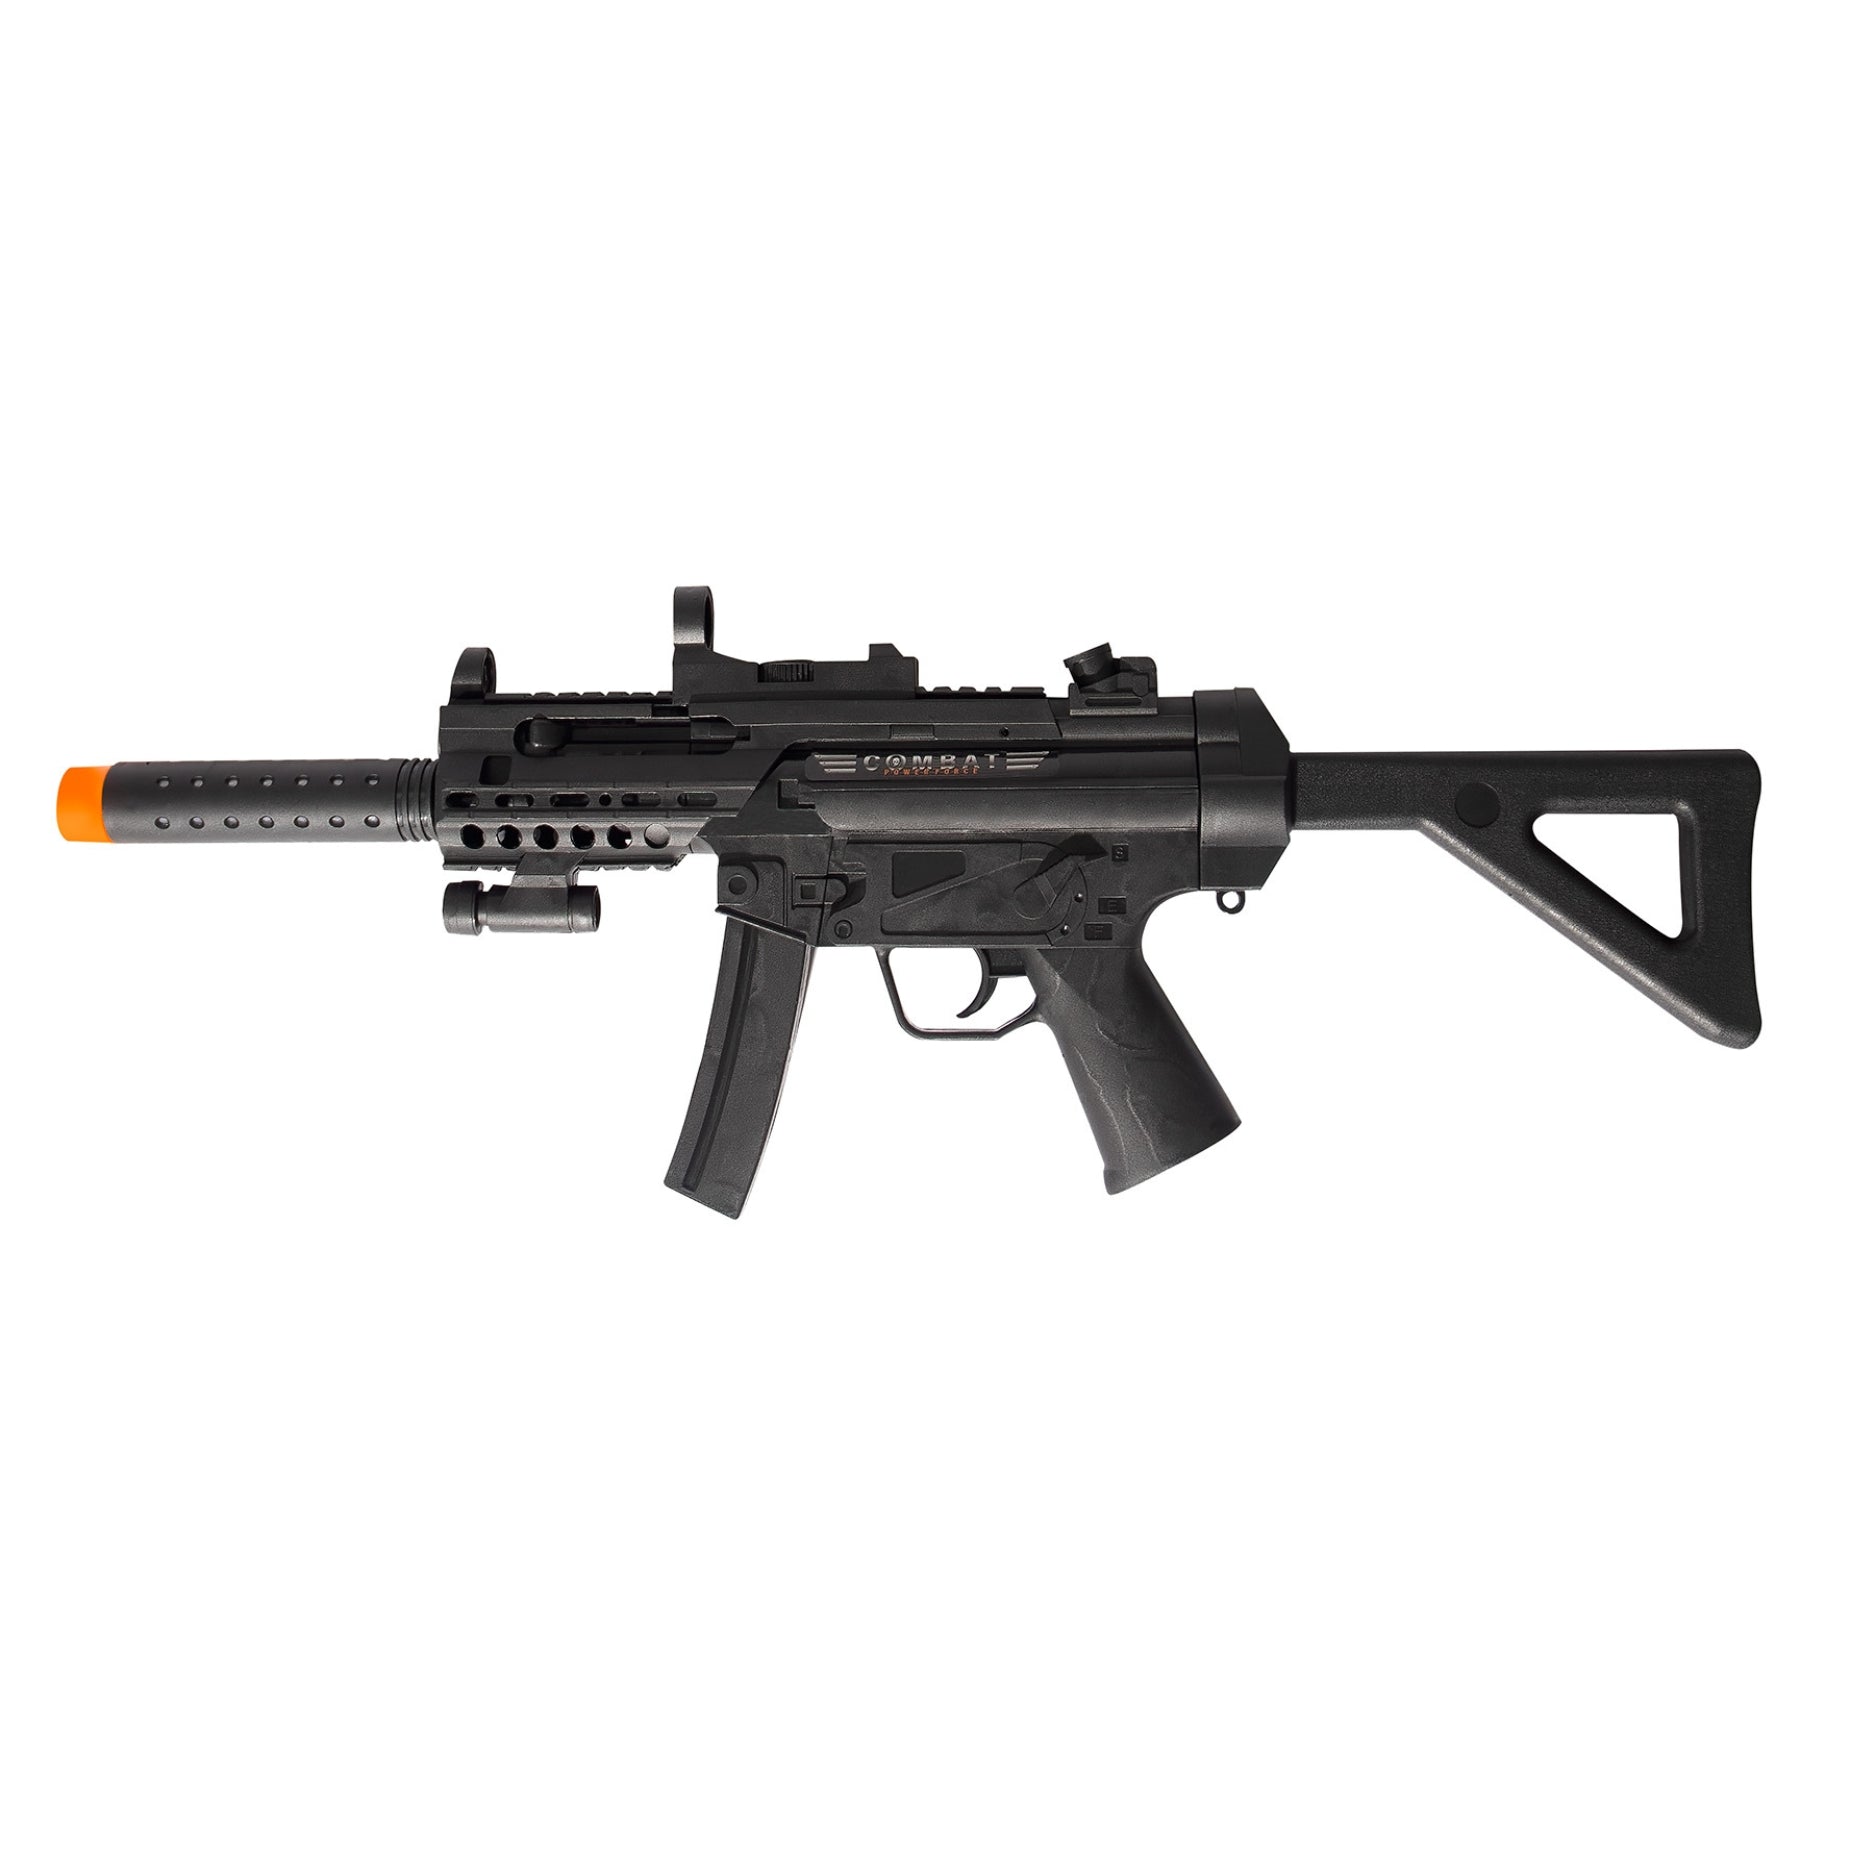 Rothco Special Forces Combat Toy Gun 613902571006 - 2